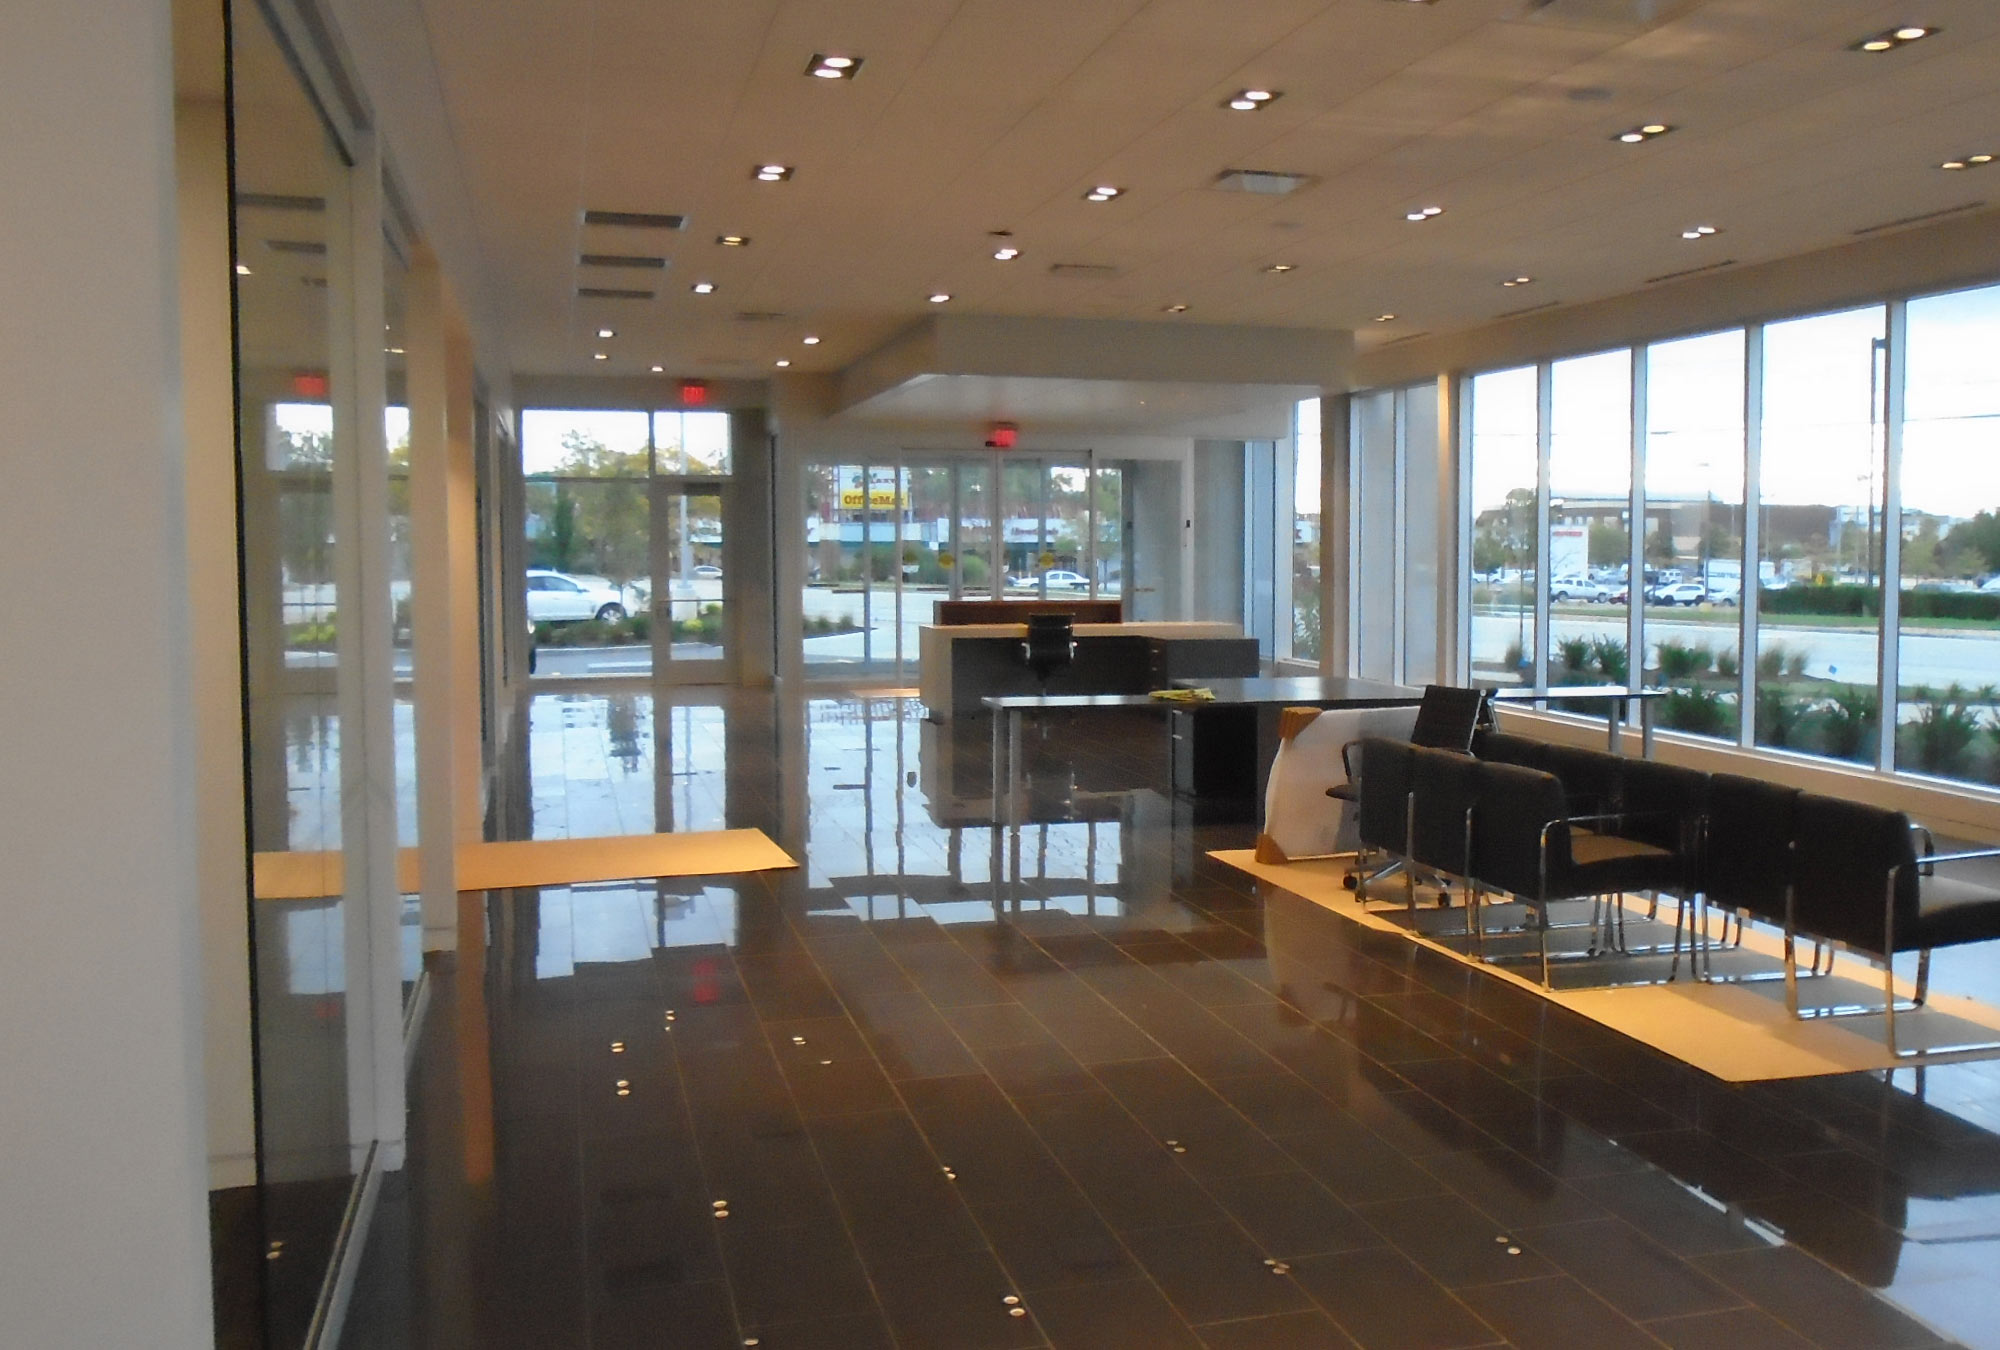 Morris Cadillac Car Dealership Contractors North Olmsted OH Show Room - by Fred Olivieri